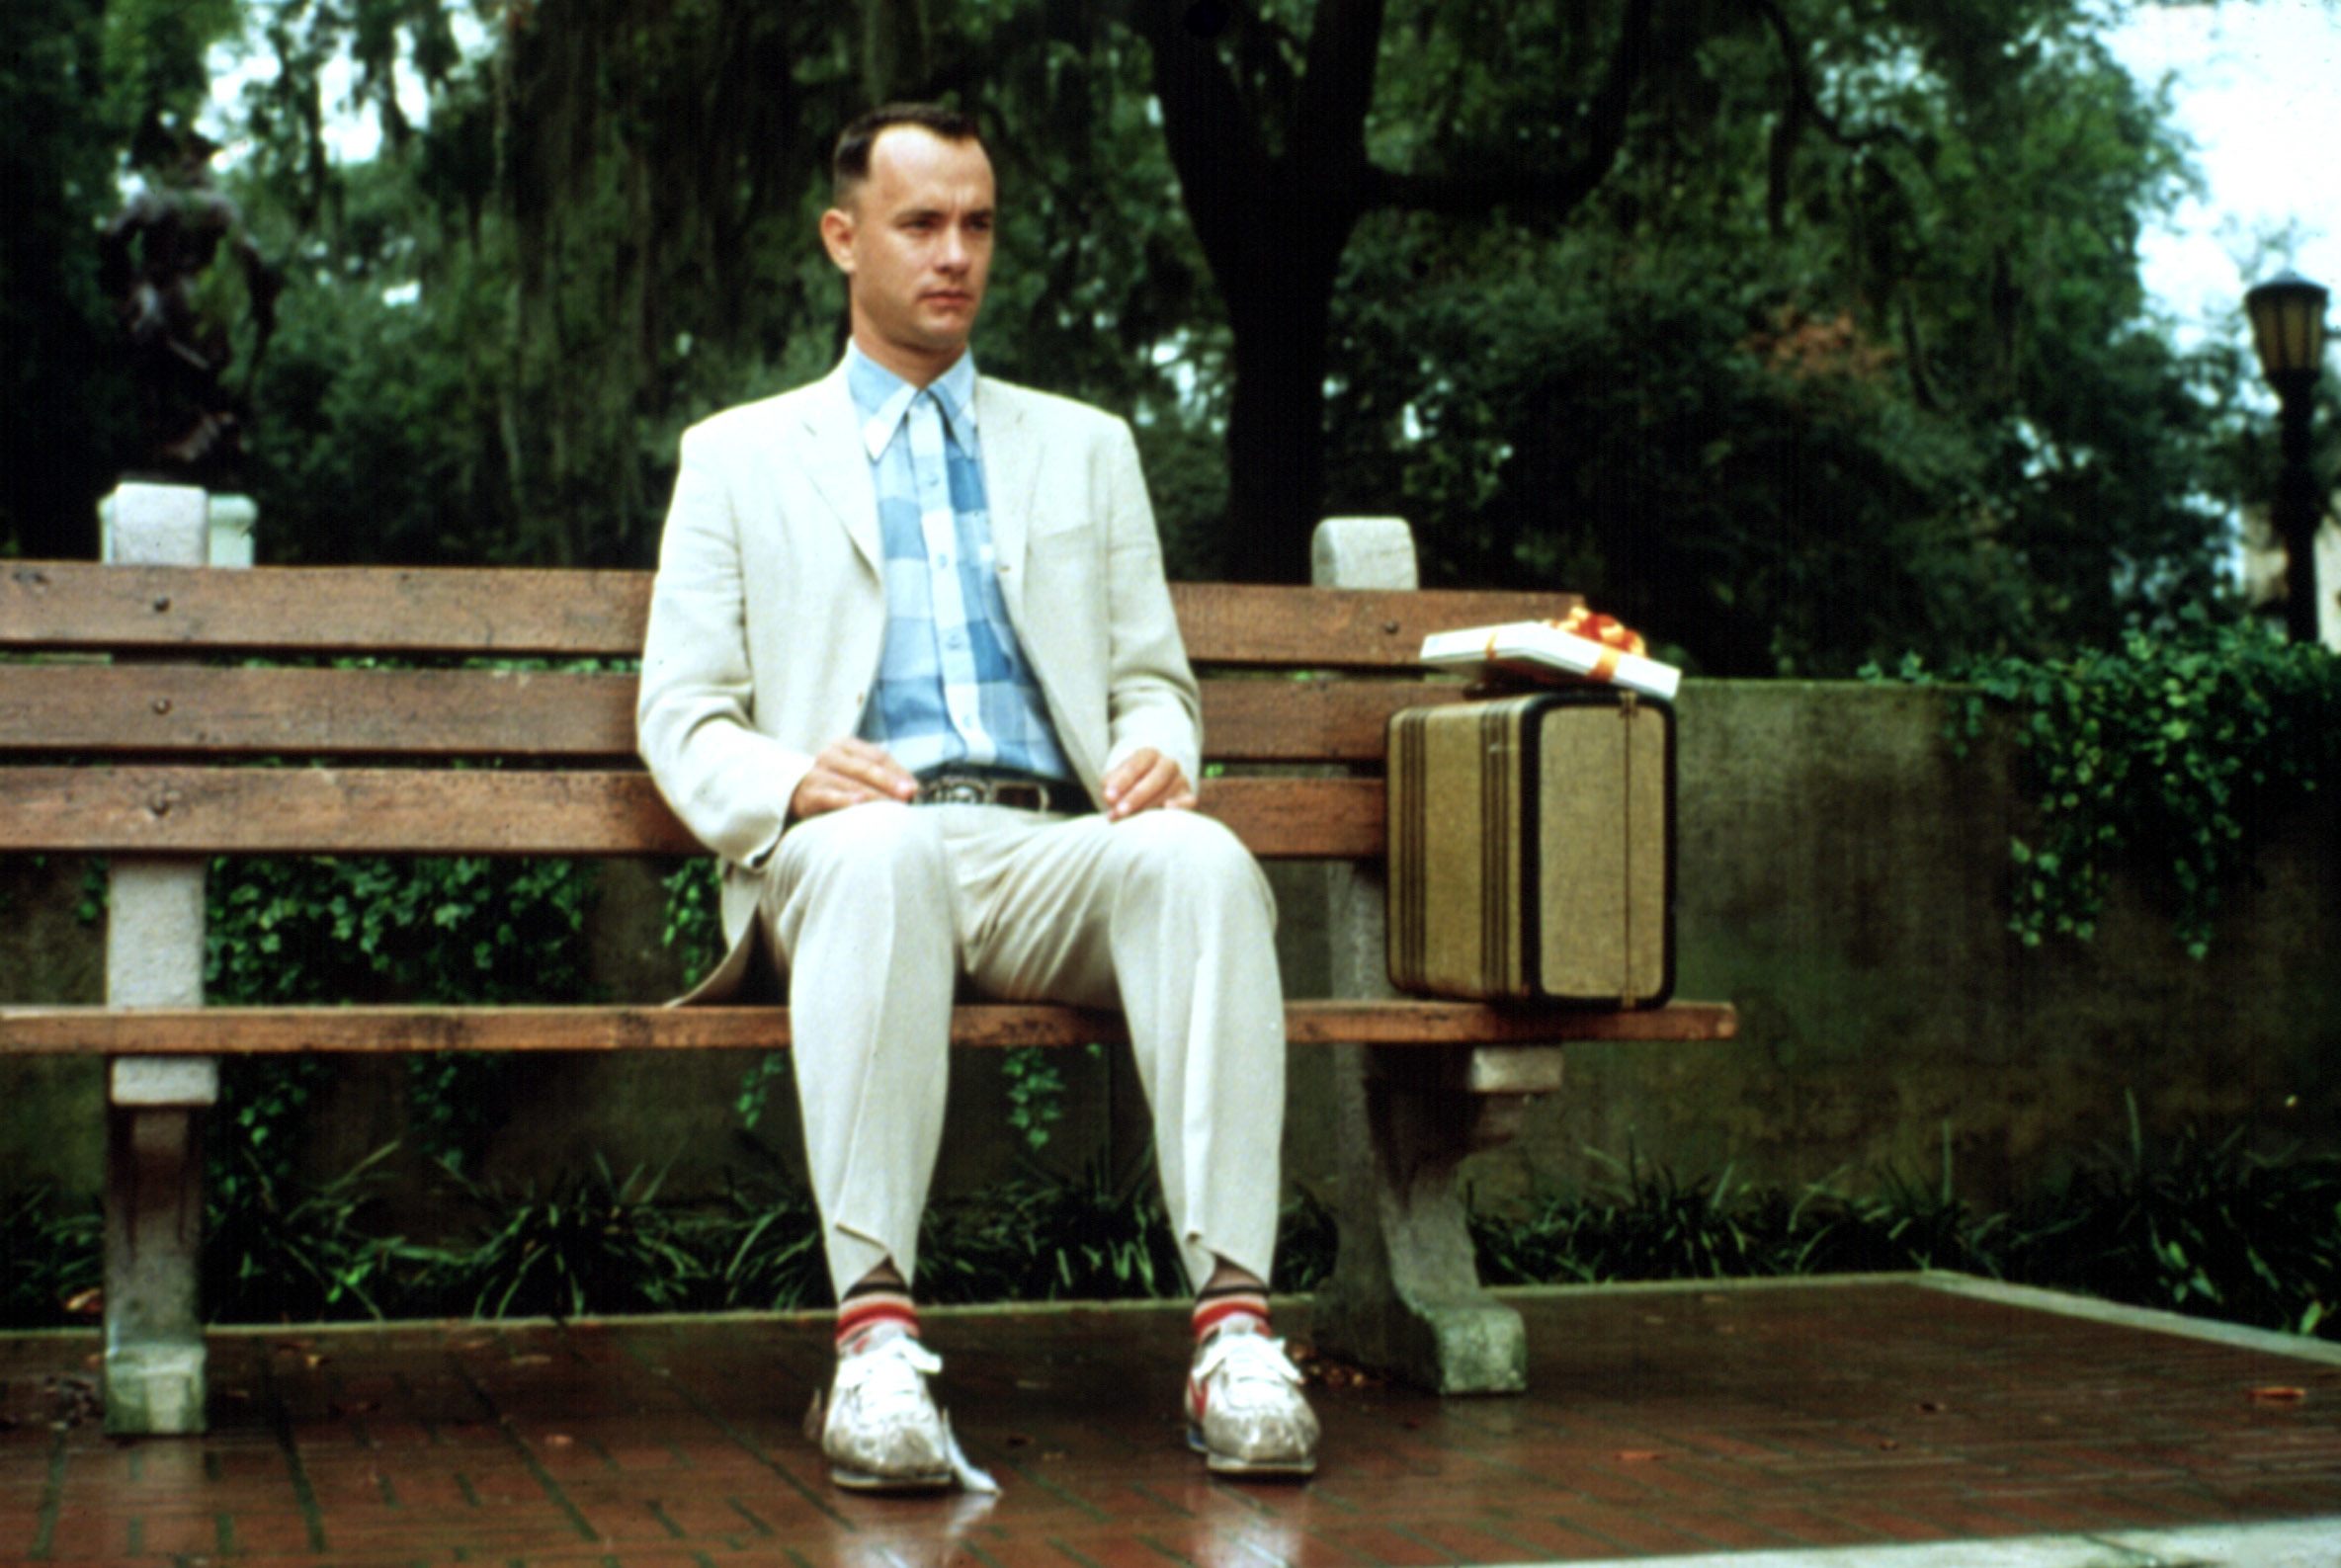 Tom Hanks as Forrest Gump, seated on a bench with a suitcase, wearing a suit and sneakers